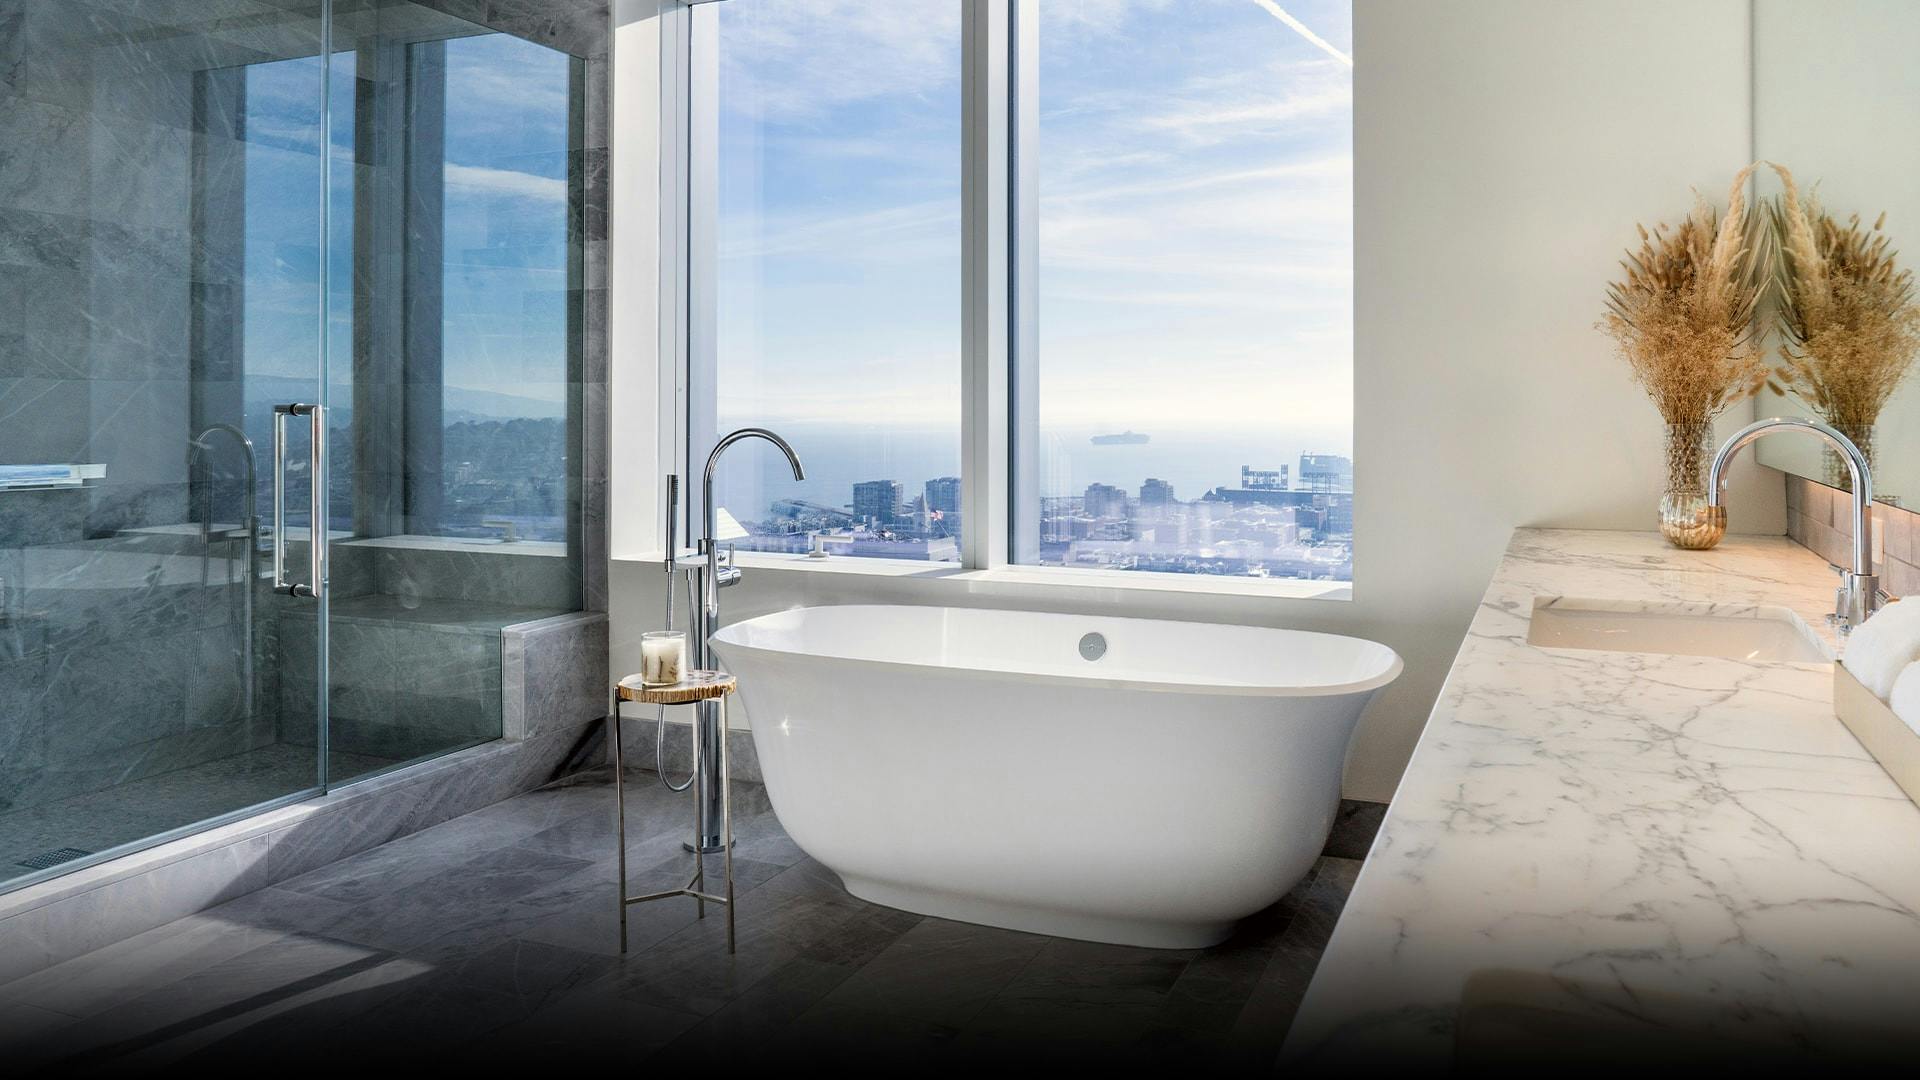 With Blue de Savoie French marble countertops, German milled cabinetry, and a key Victoria & Albert Amiata Tub, the master bathrooms in the Tower are made to be relaxing and refreshing. 